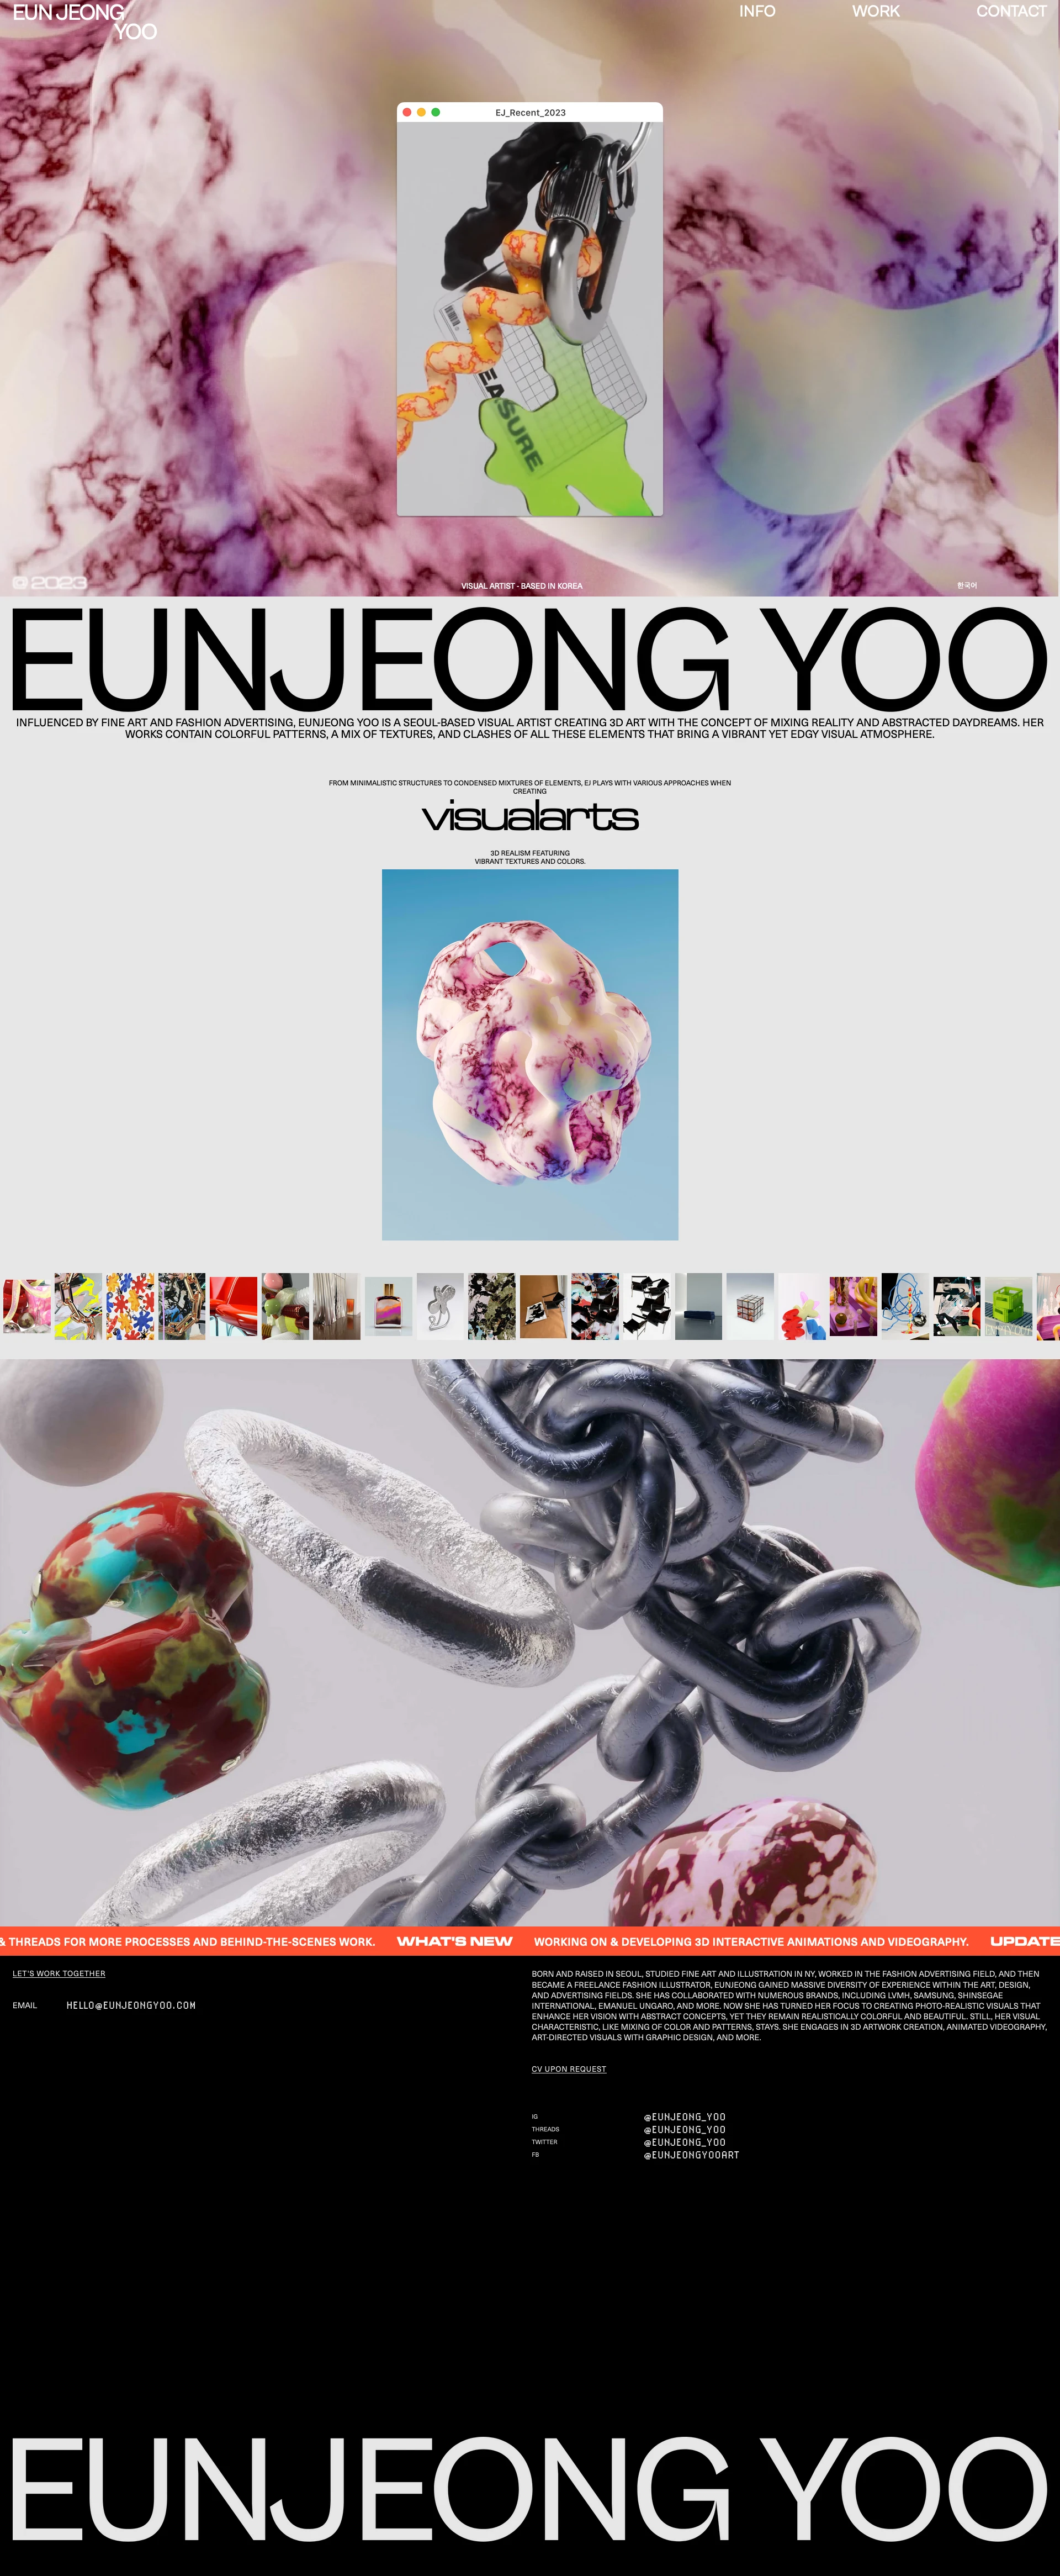 EUN JEONG YOO Landing Page Example: Influenced by fine art and fashion advertising, EunJeong creates 3D based vibrant visual artworks.